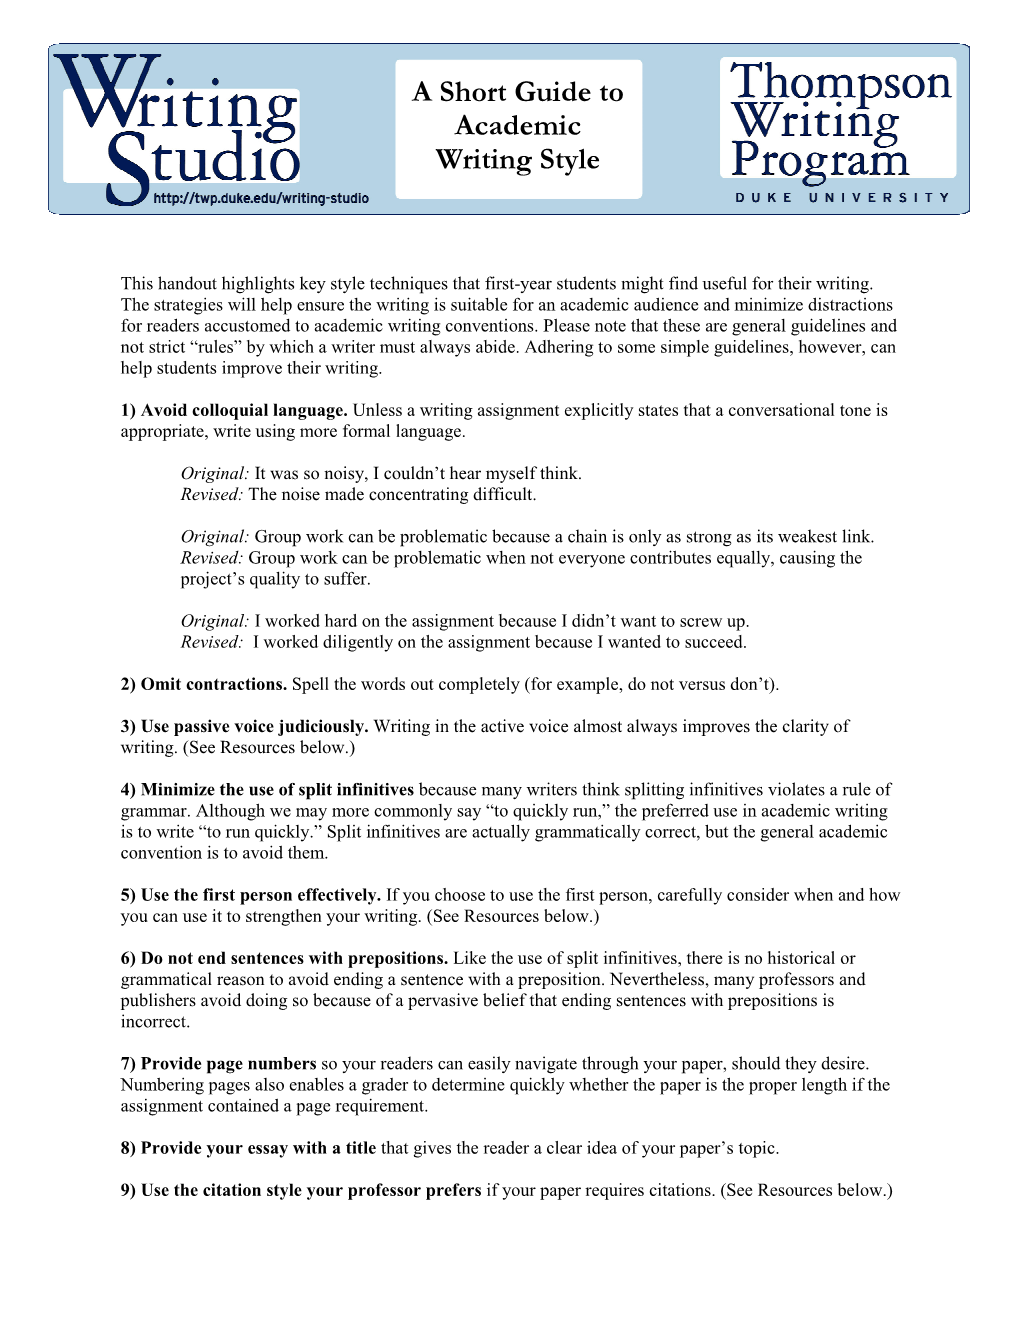 A Short Guide to Academic Writing Style